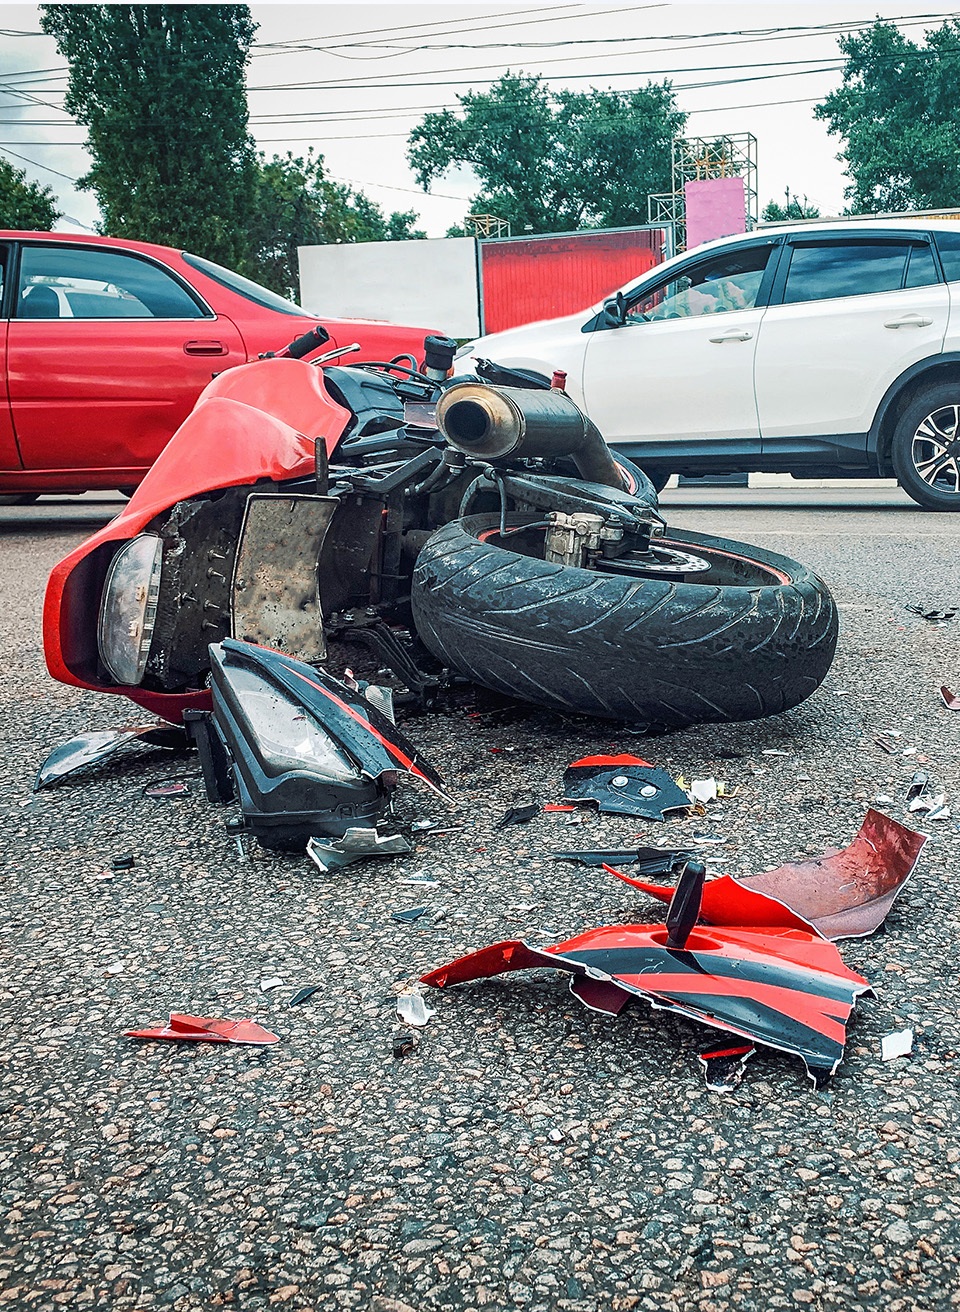 A wrecked motorcycle on the ground with pieces broken off.